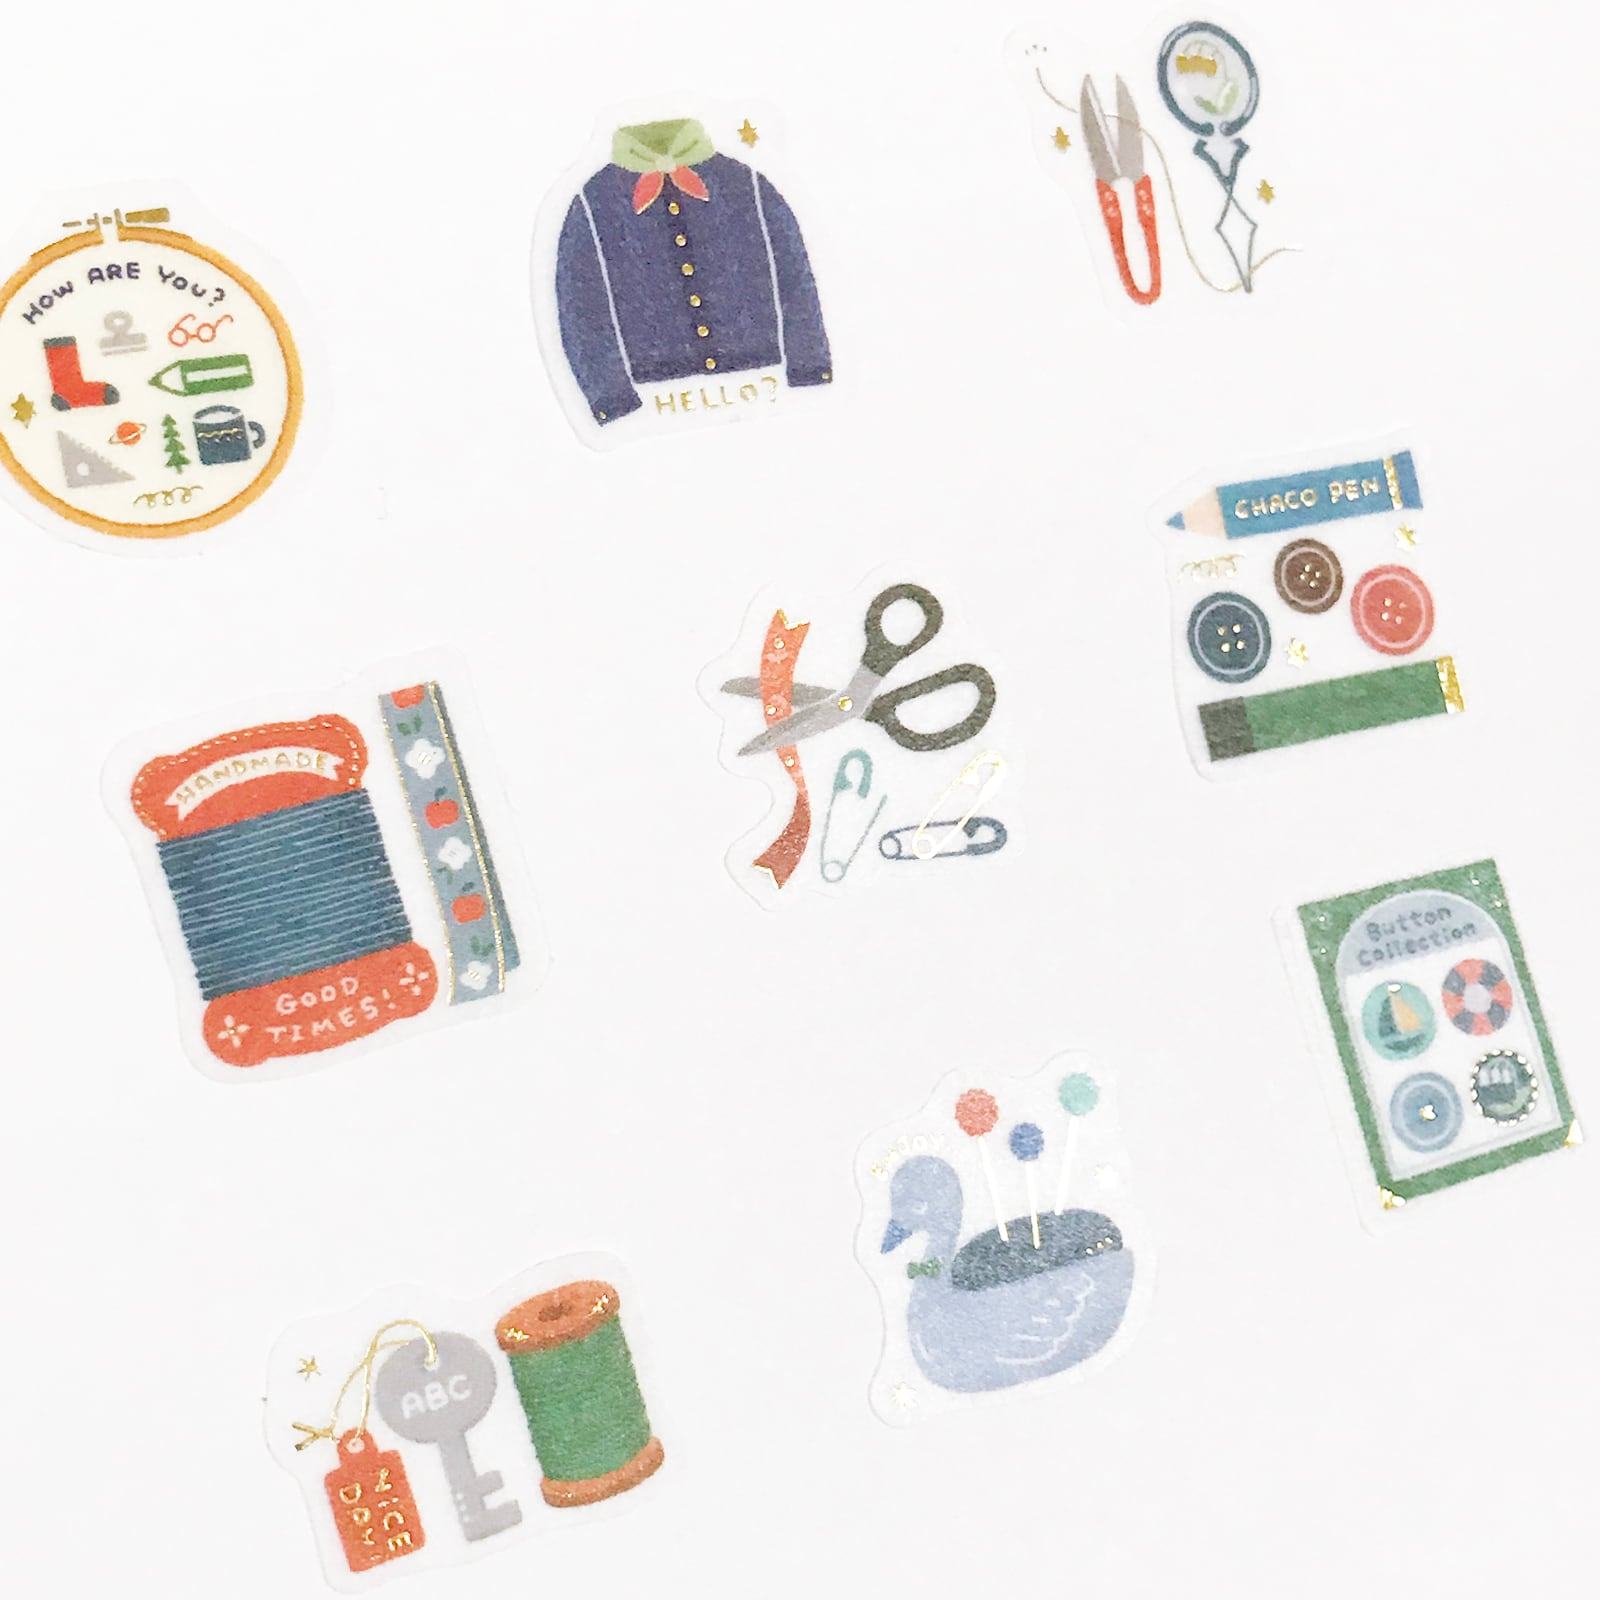 eric Flake Stickers - Sewing Items - Techo Treats